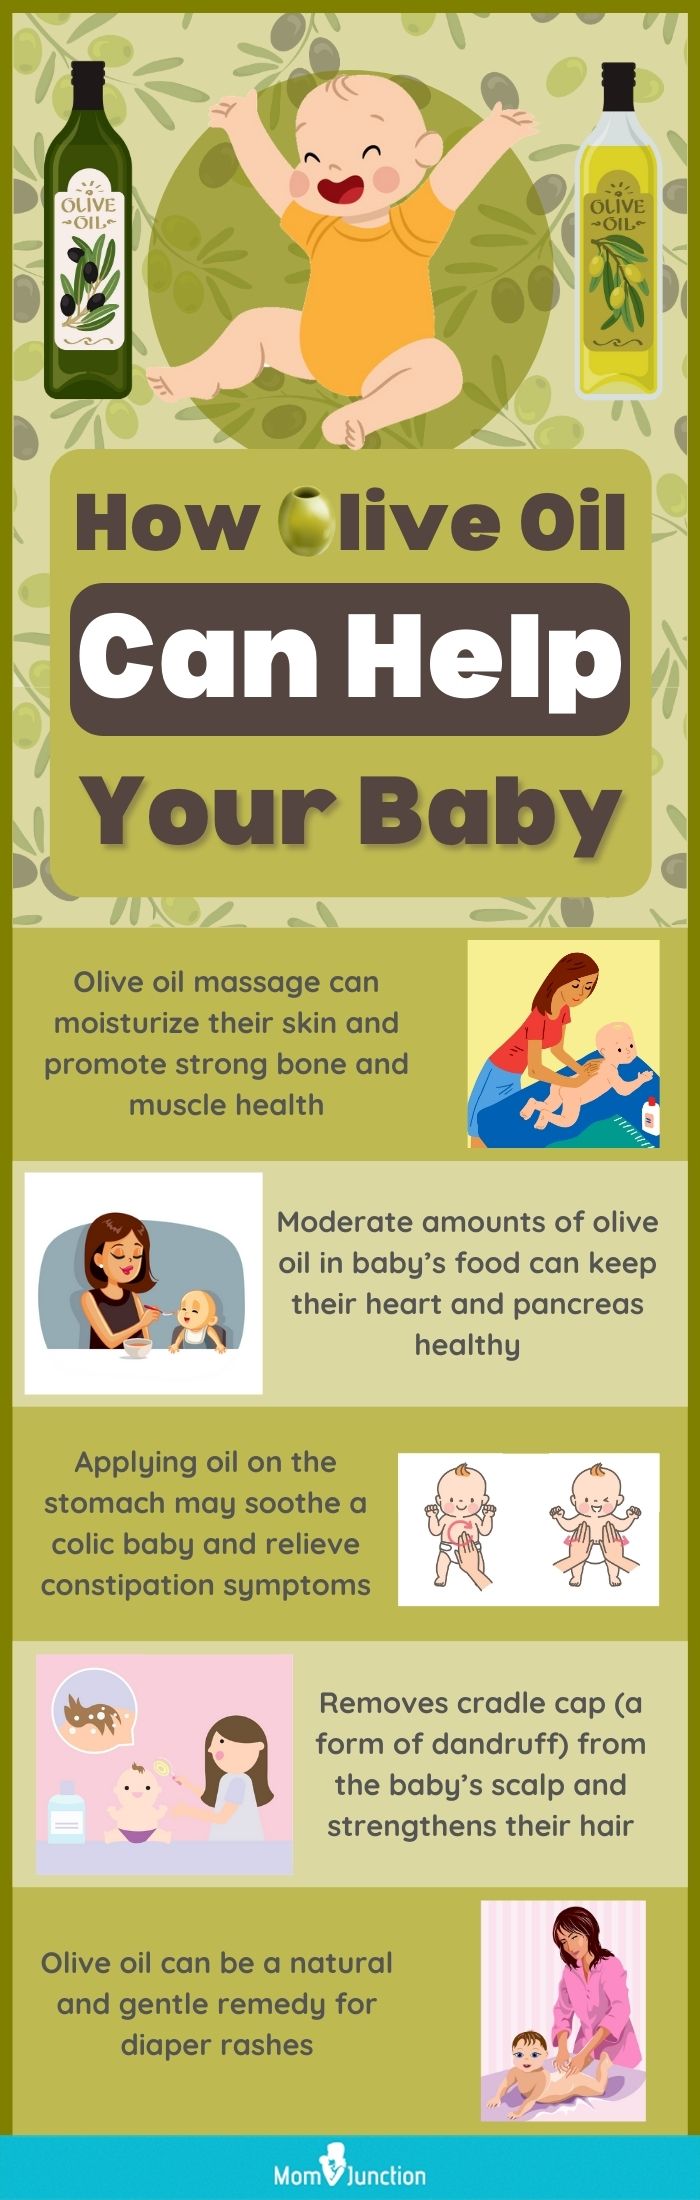 how olive oil can help your baby (infographic)